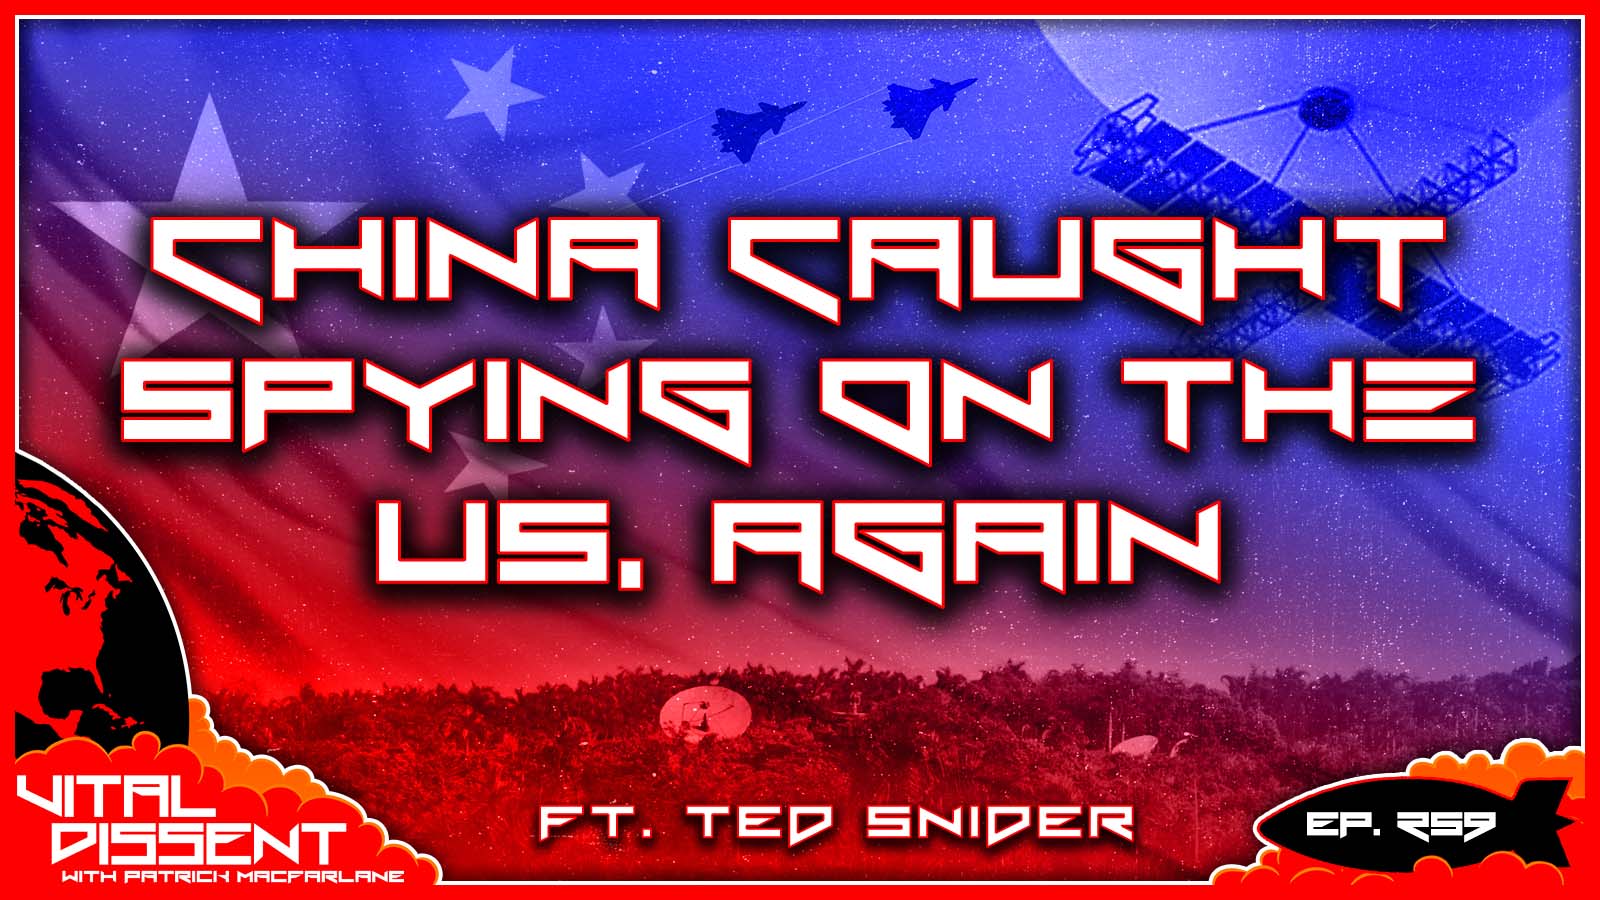 China Caught Spying on the US, AGAIN ft. Ted Snider Ep. 259